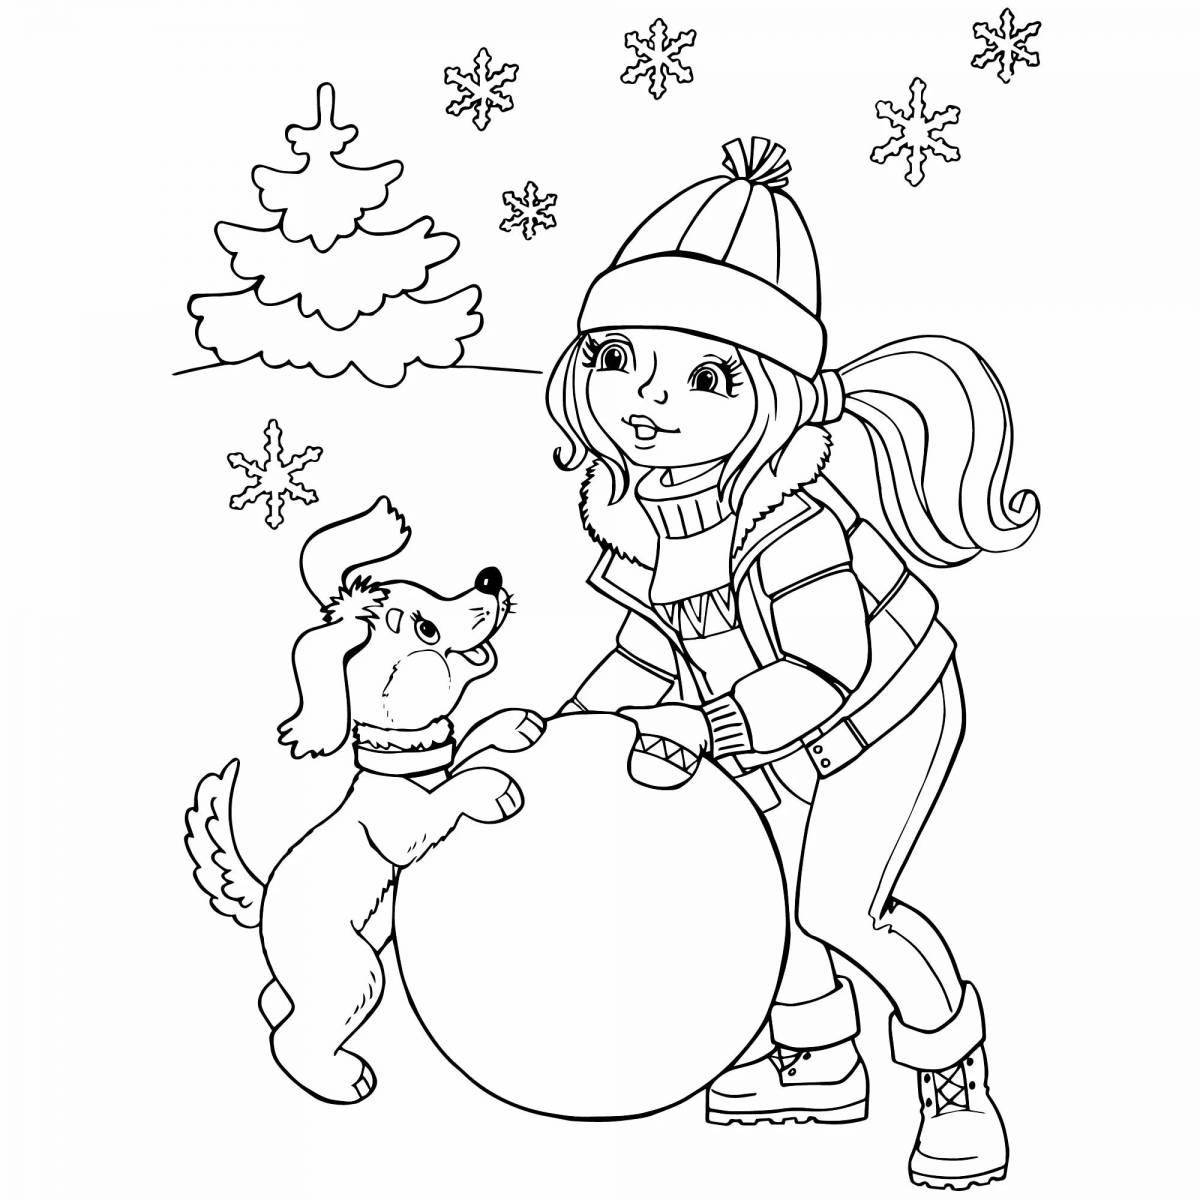 Animated winter coloring book for children 6-7 years old